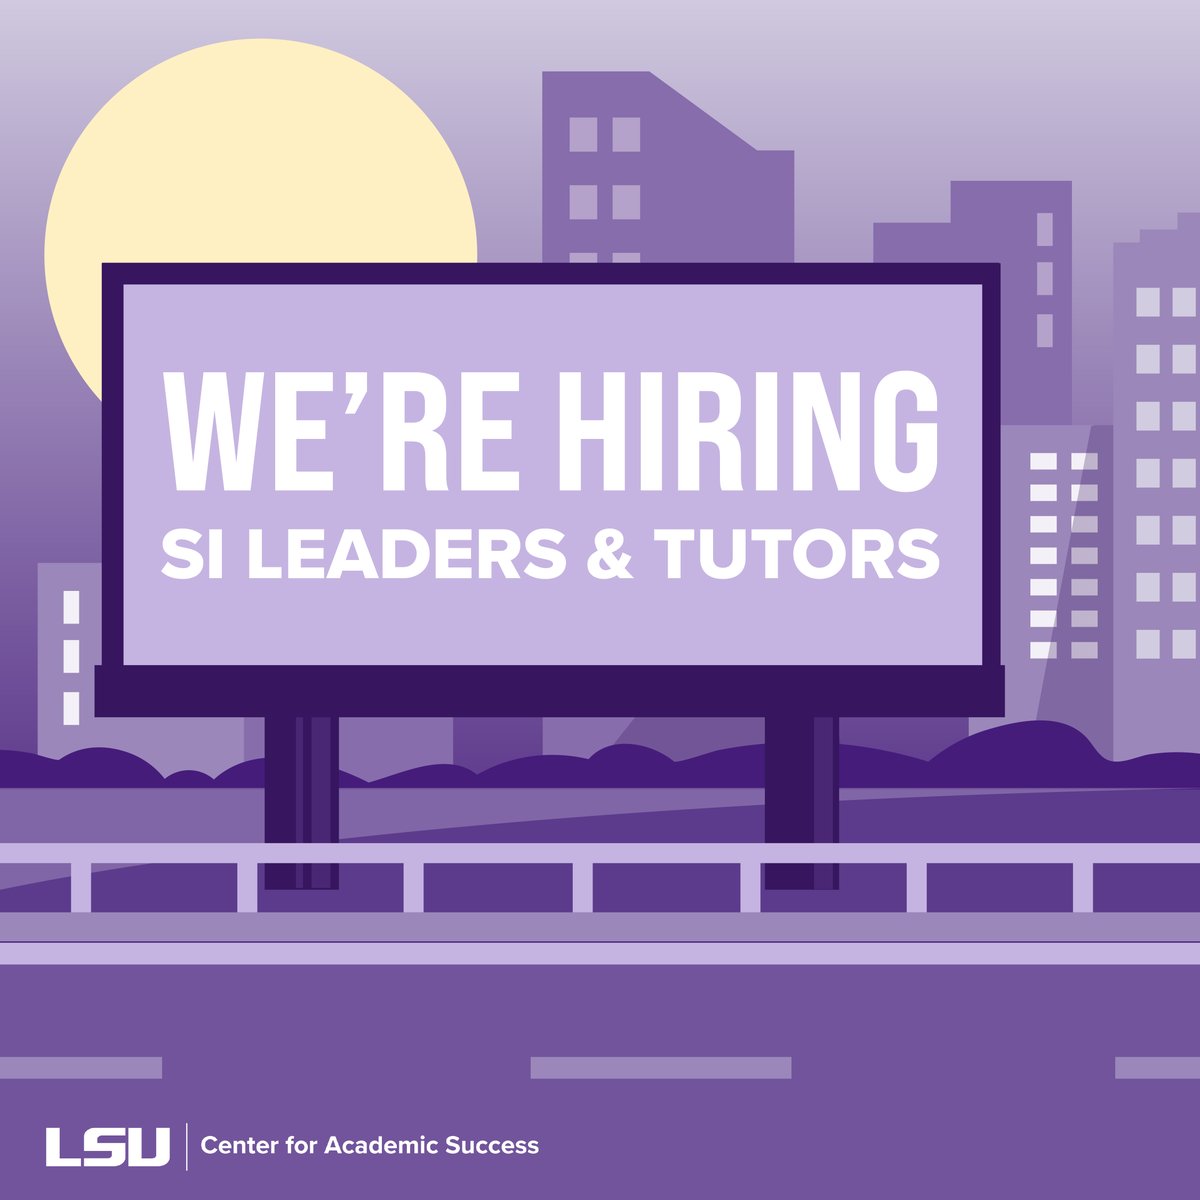 Get paid to help your peers in a subject you're passionate about! The CAS is now hiring SI Leaders and Tutors. Apply on our website today!